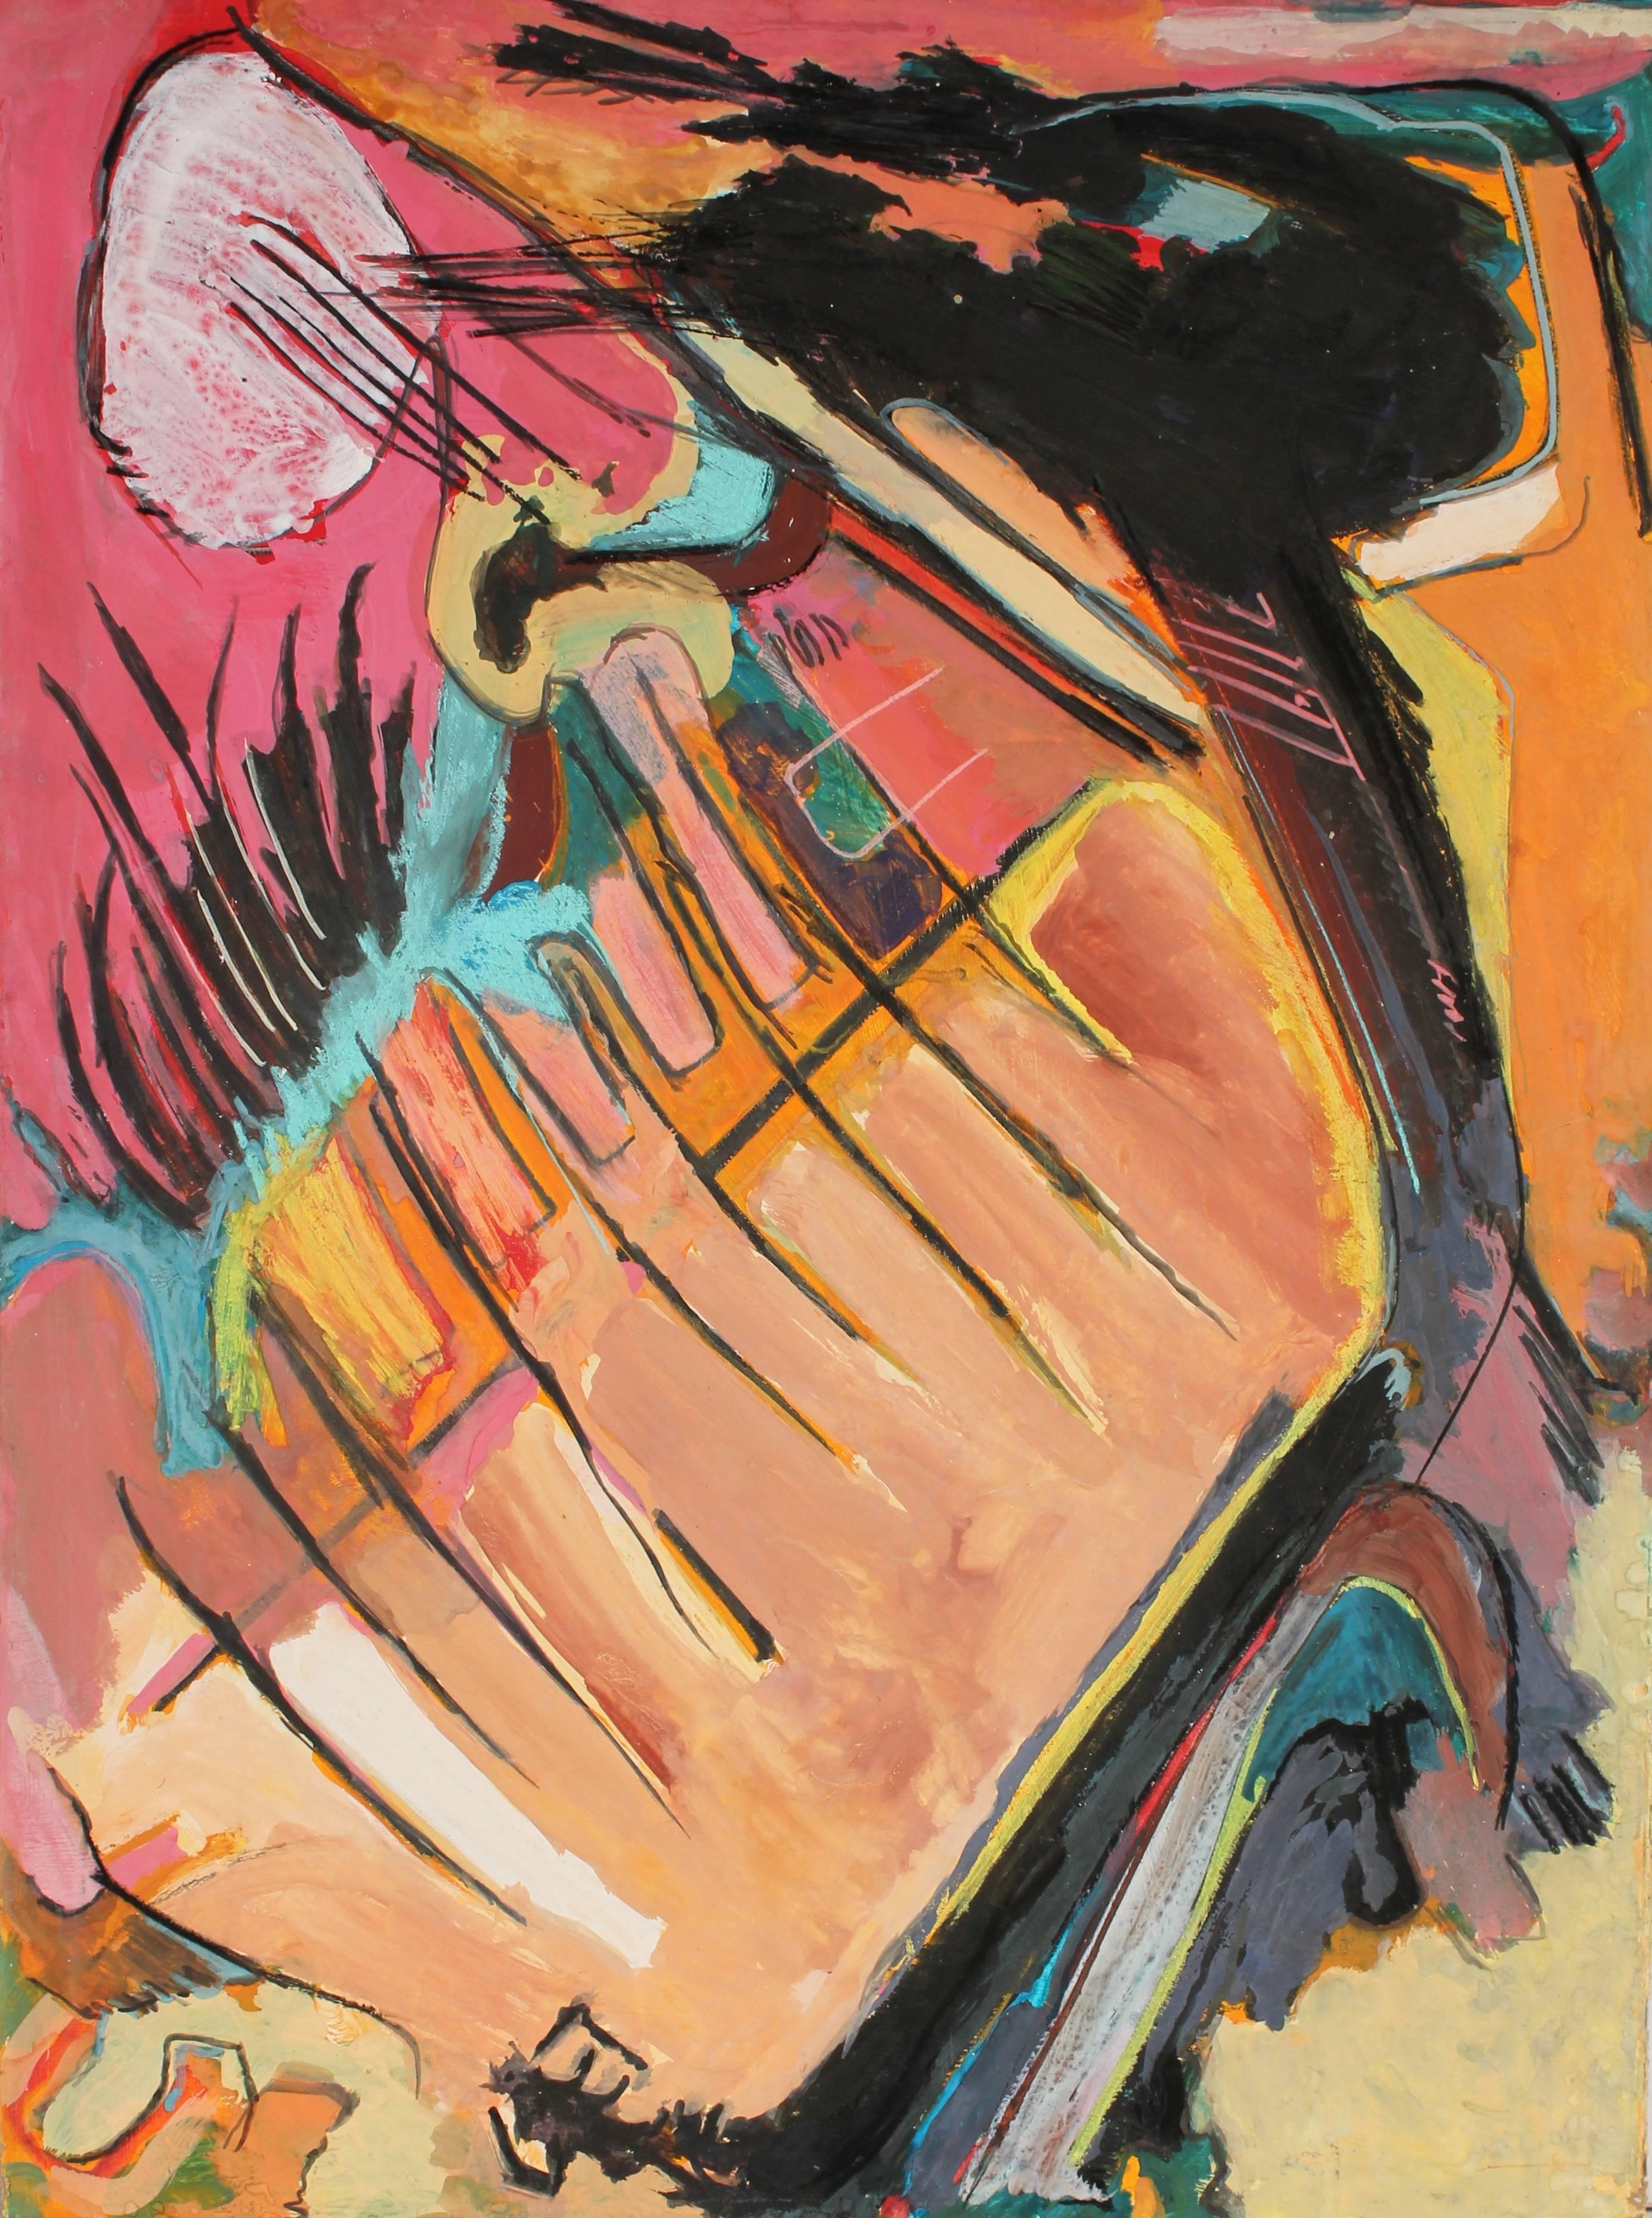 Jack Freeman Abstract Painting - Abstract Expressionist Painting in Pink and Orange, Circa 1960s